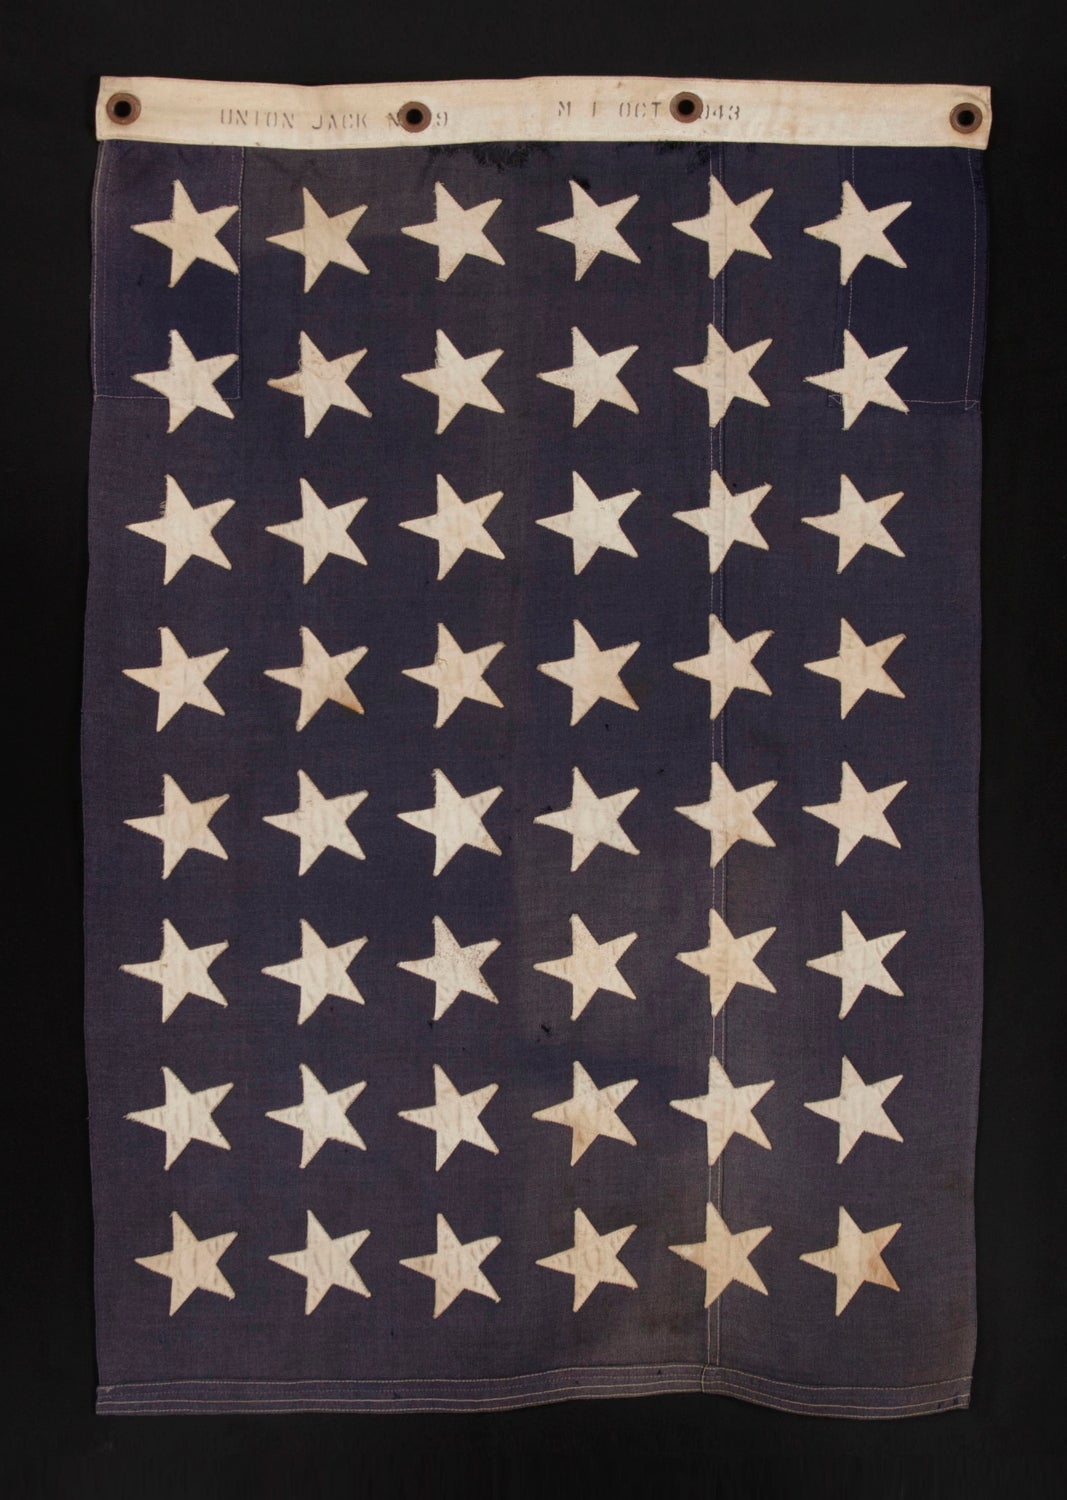 48 STAR U.S. NAVY JACK, MADE AT MARE ISLAND, CALIFORNIA, HEADQUARTERS OF THE PACIFIC FLEET, DURING WWII, DATED 1943:

 United States Navy jack with 48 stars, made during WWII (U.S. involvement 1941-45) at Mare Island, California, Headquarters of